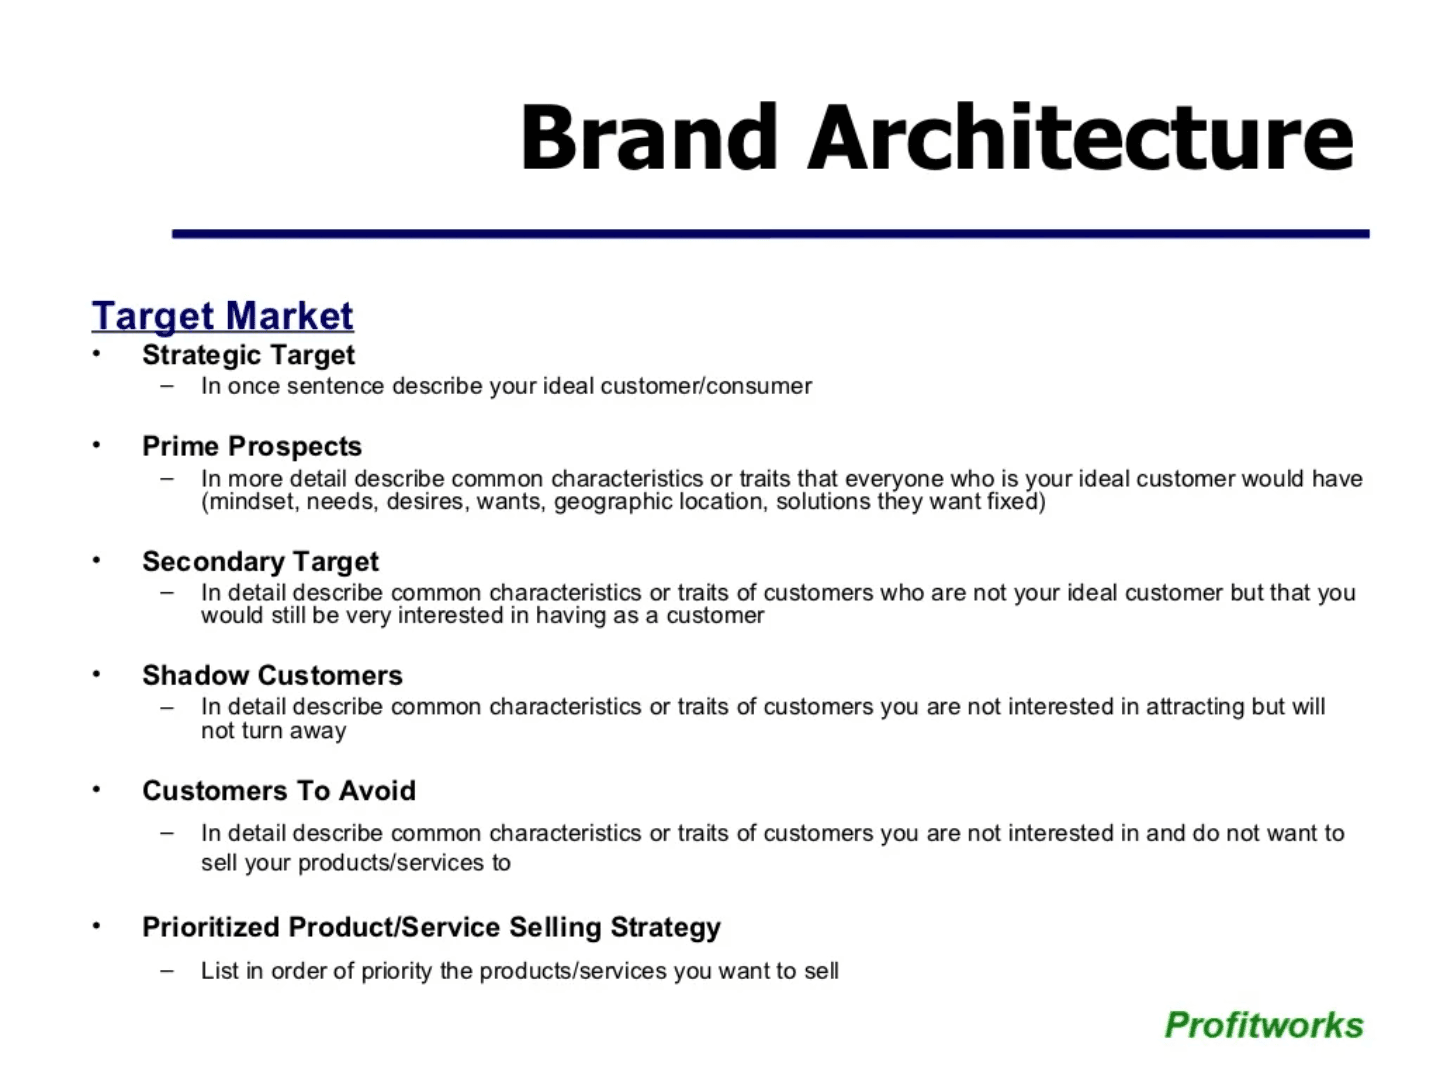 Example of a target market outline for brand architecture